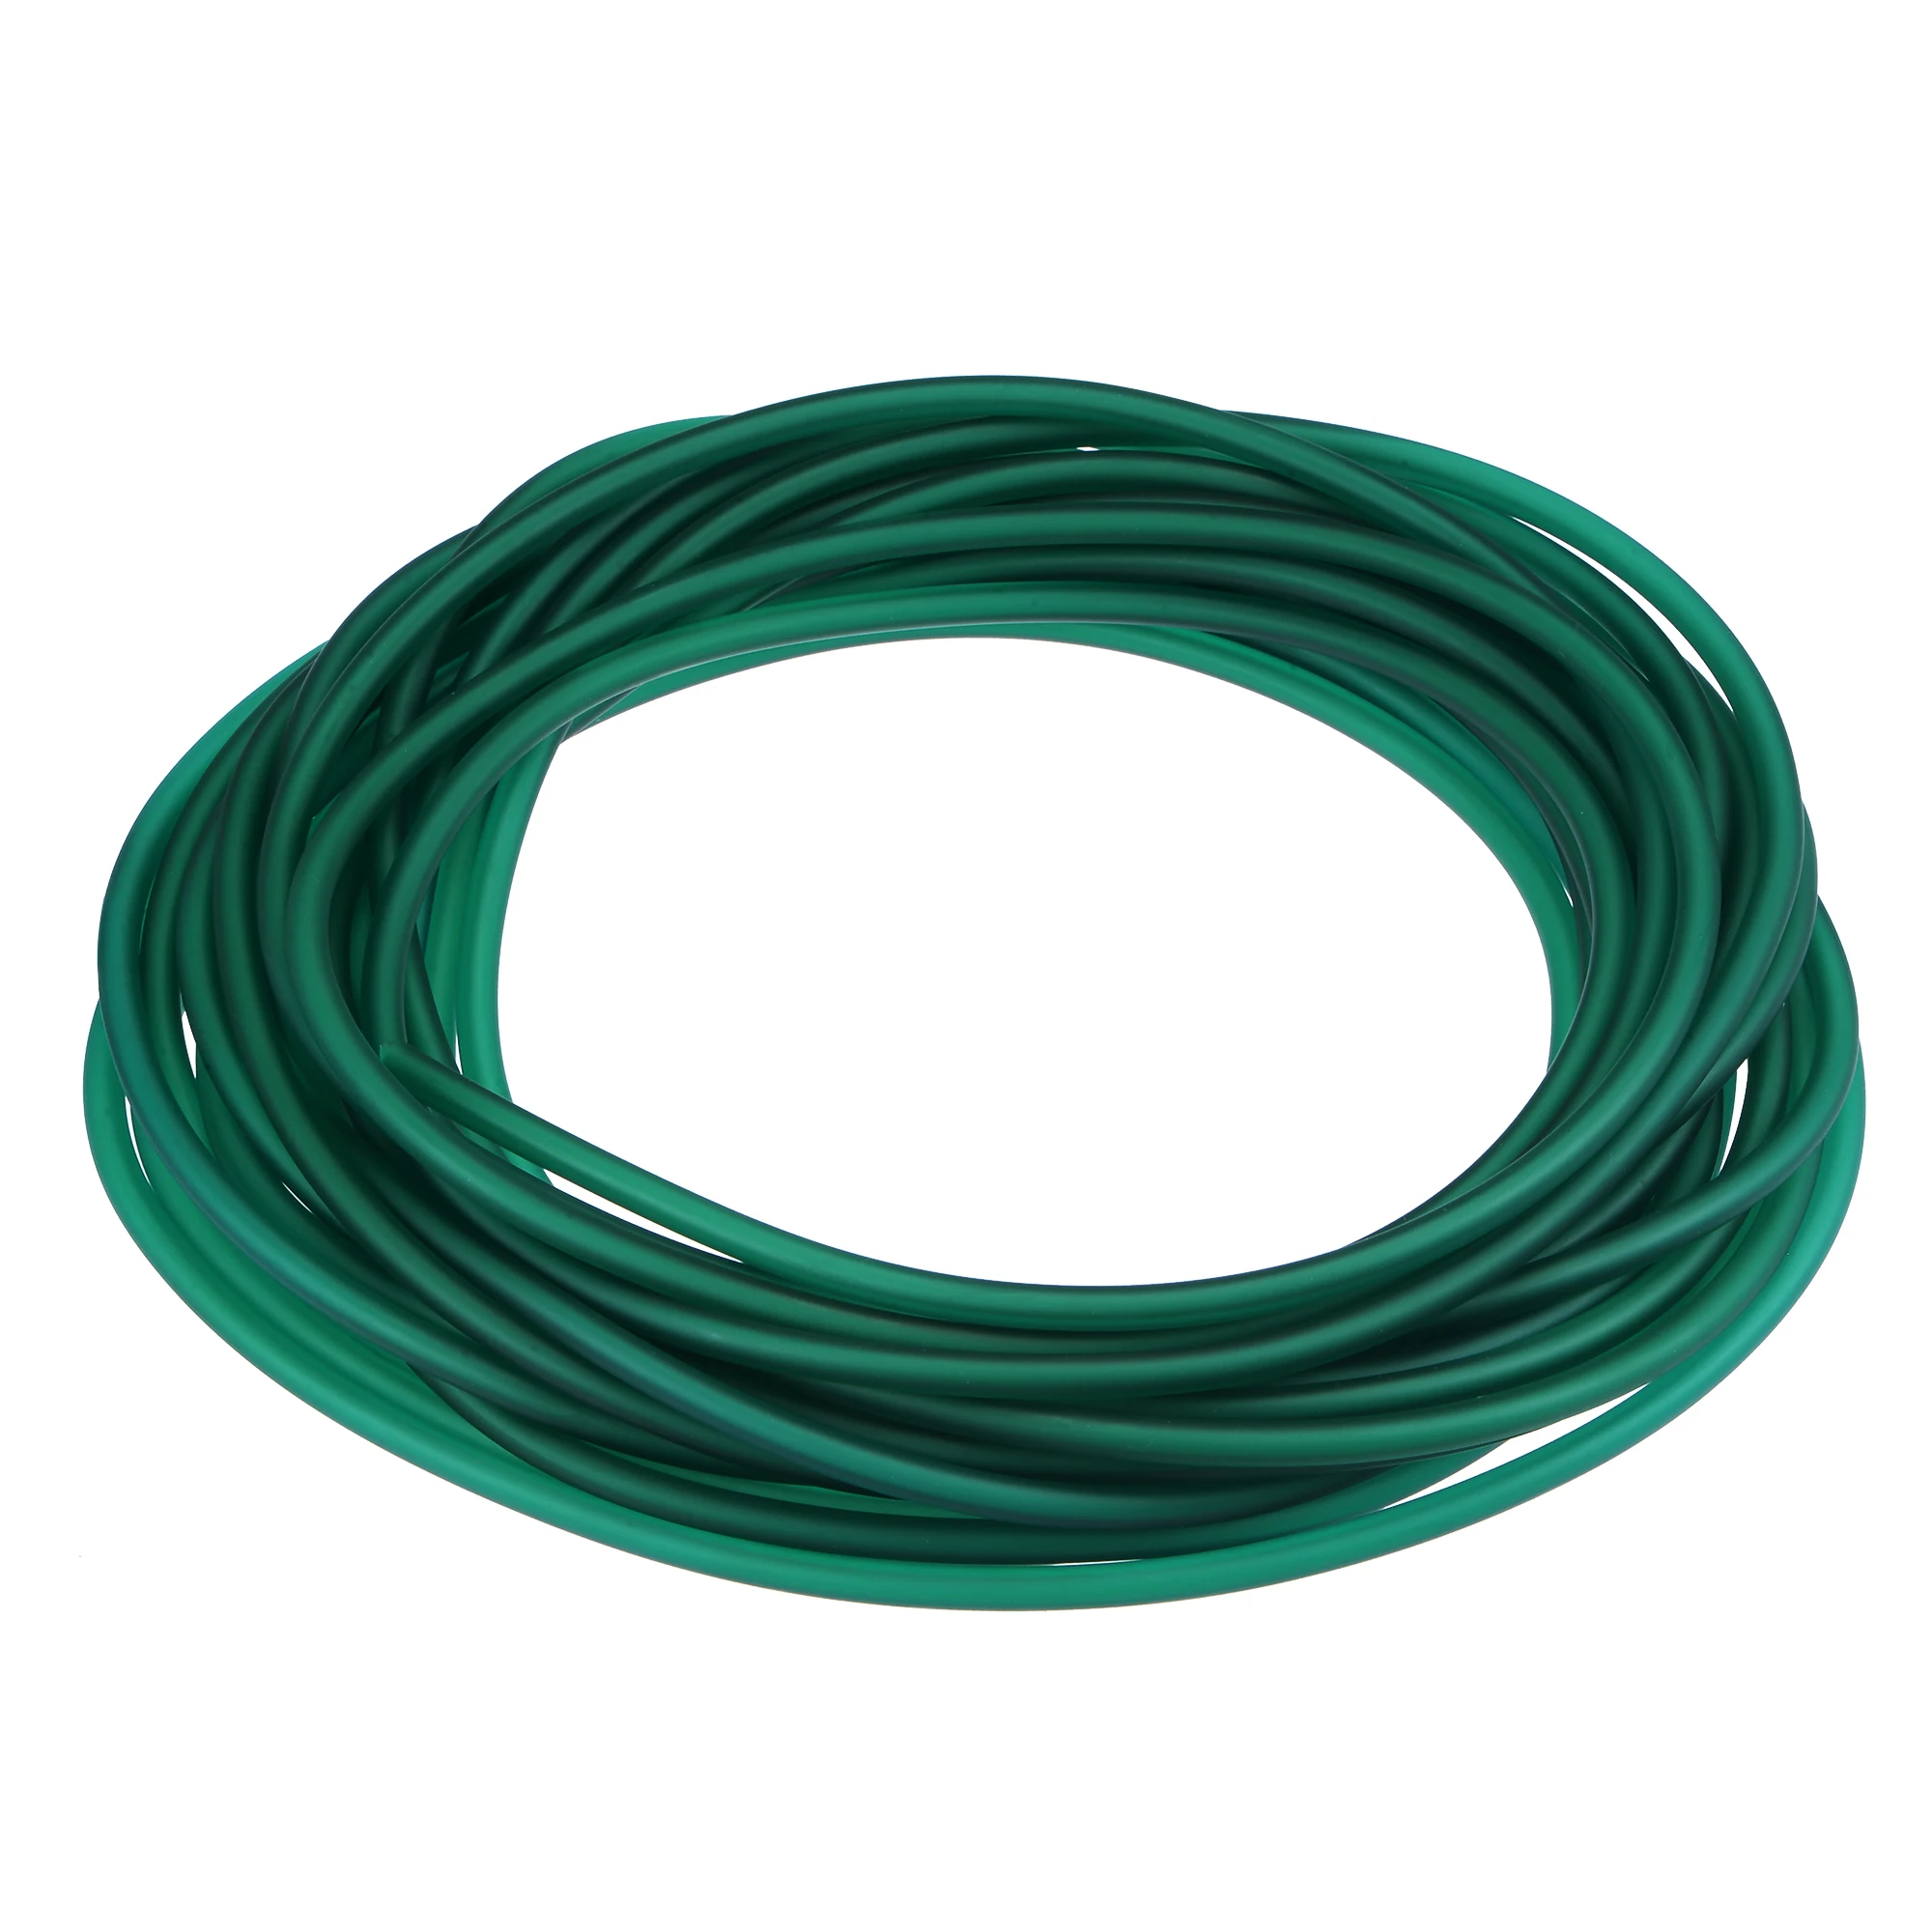 

Uxcell Latex Tubing 1/16-inch ID 3/16-inch OD 33ft Elastic Rubber Hose Green